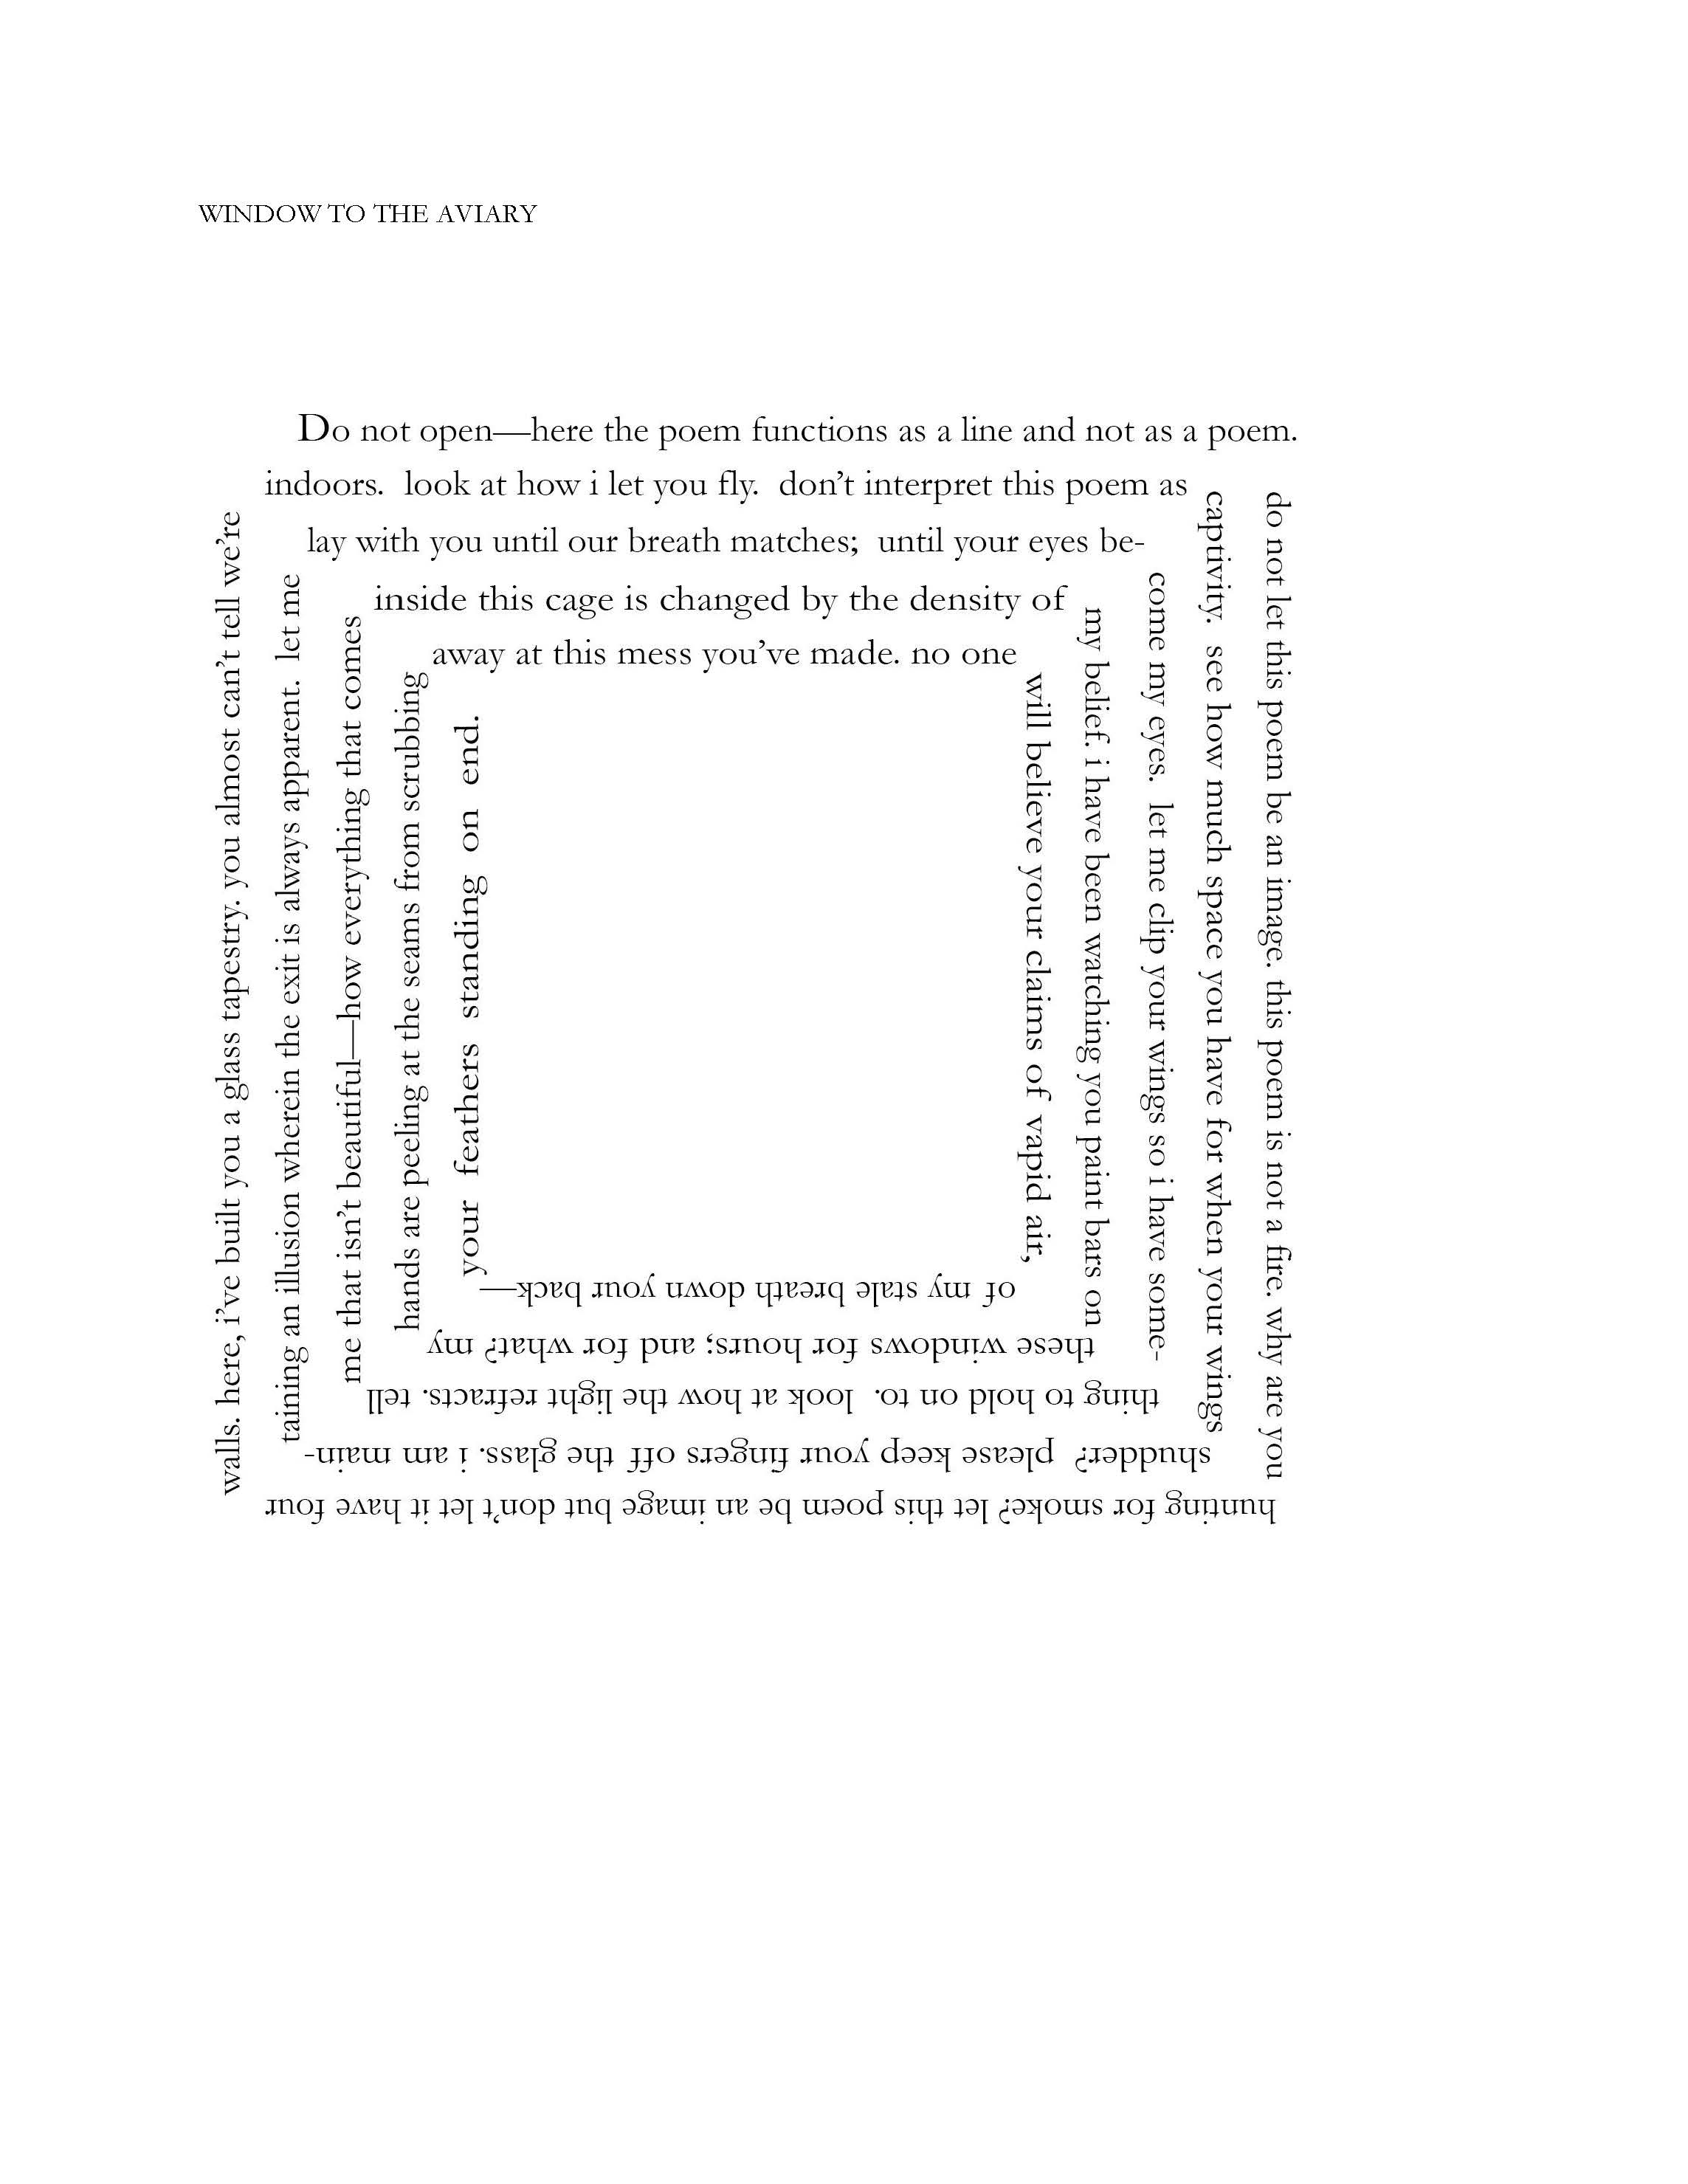 Poetry written in a square by Bennett Nieberg